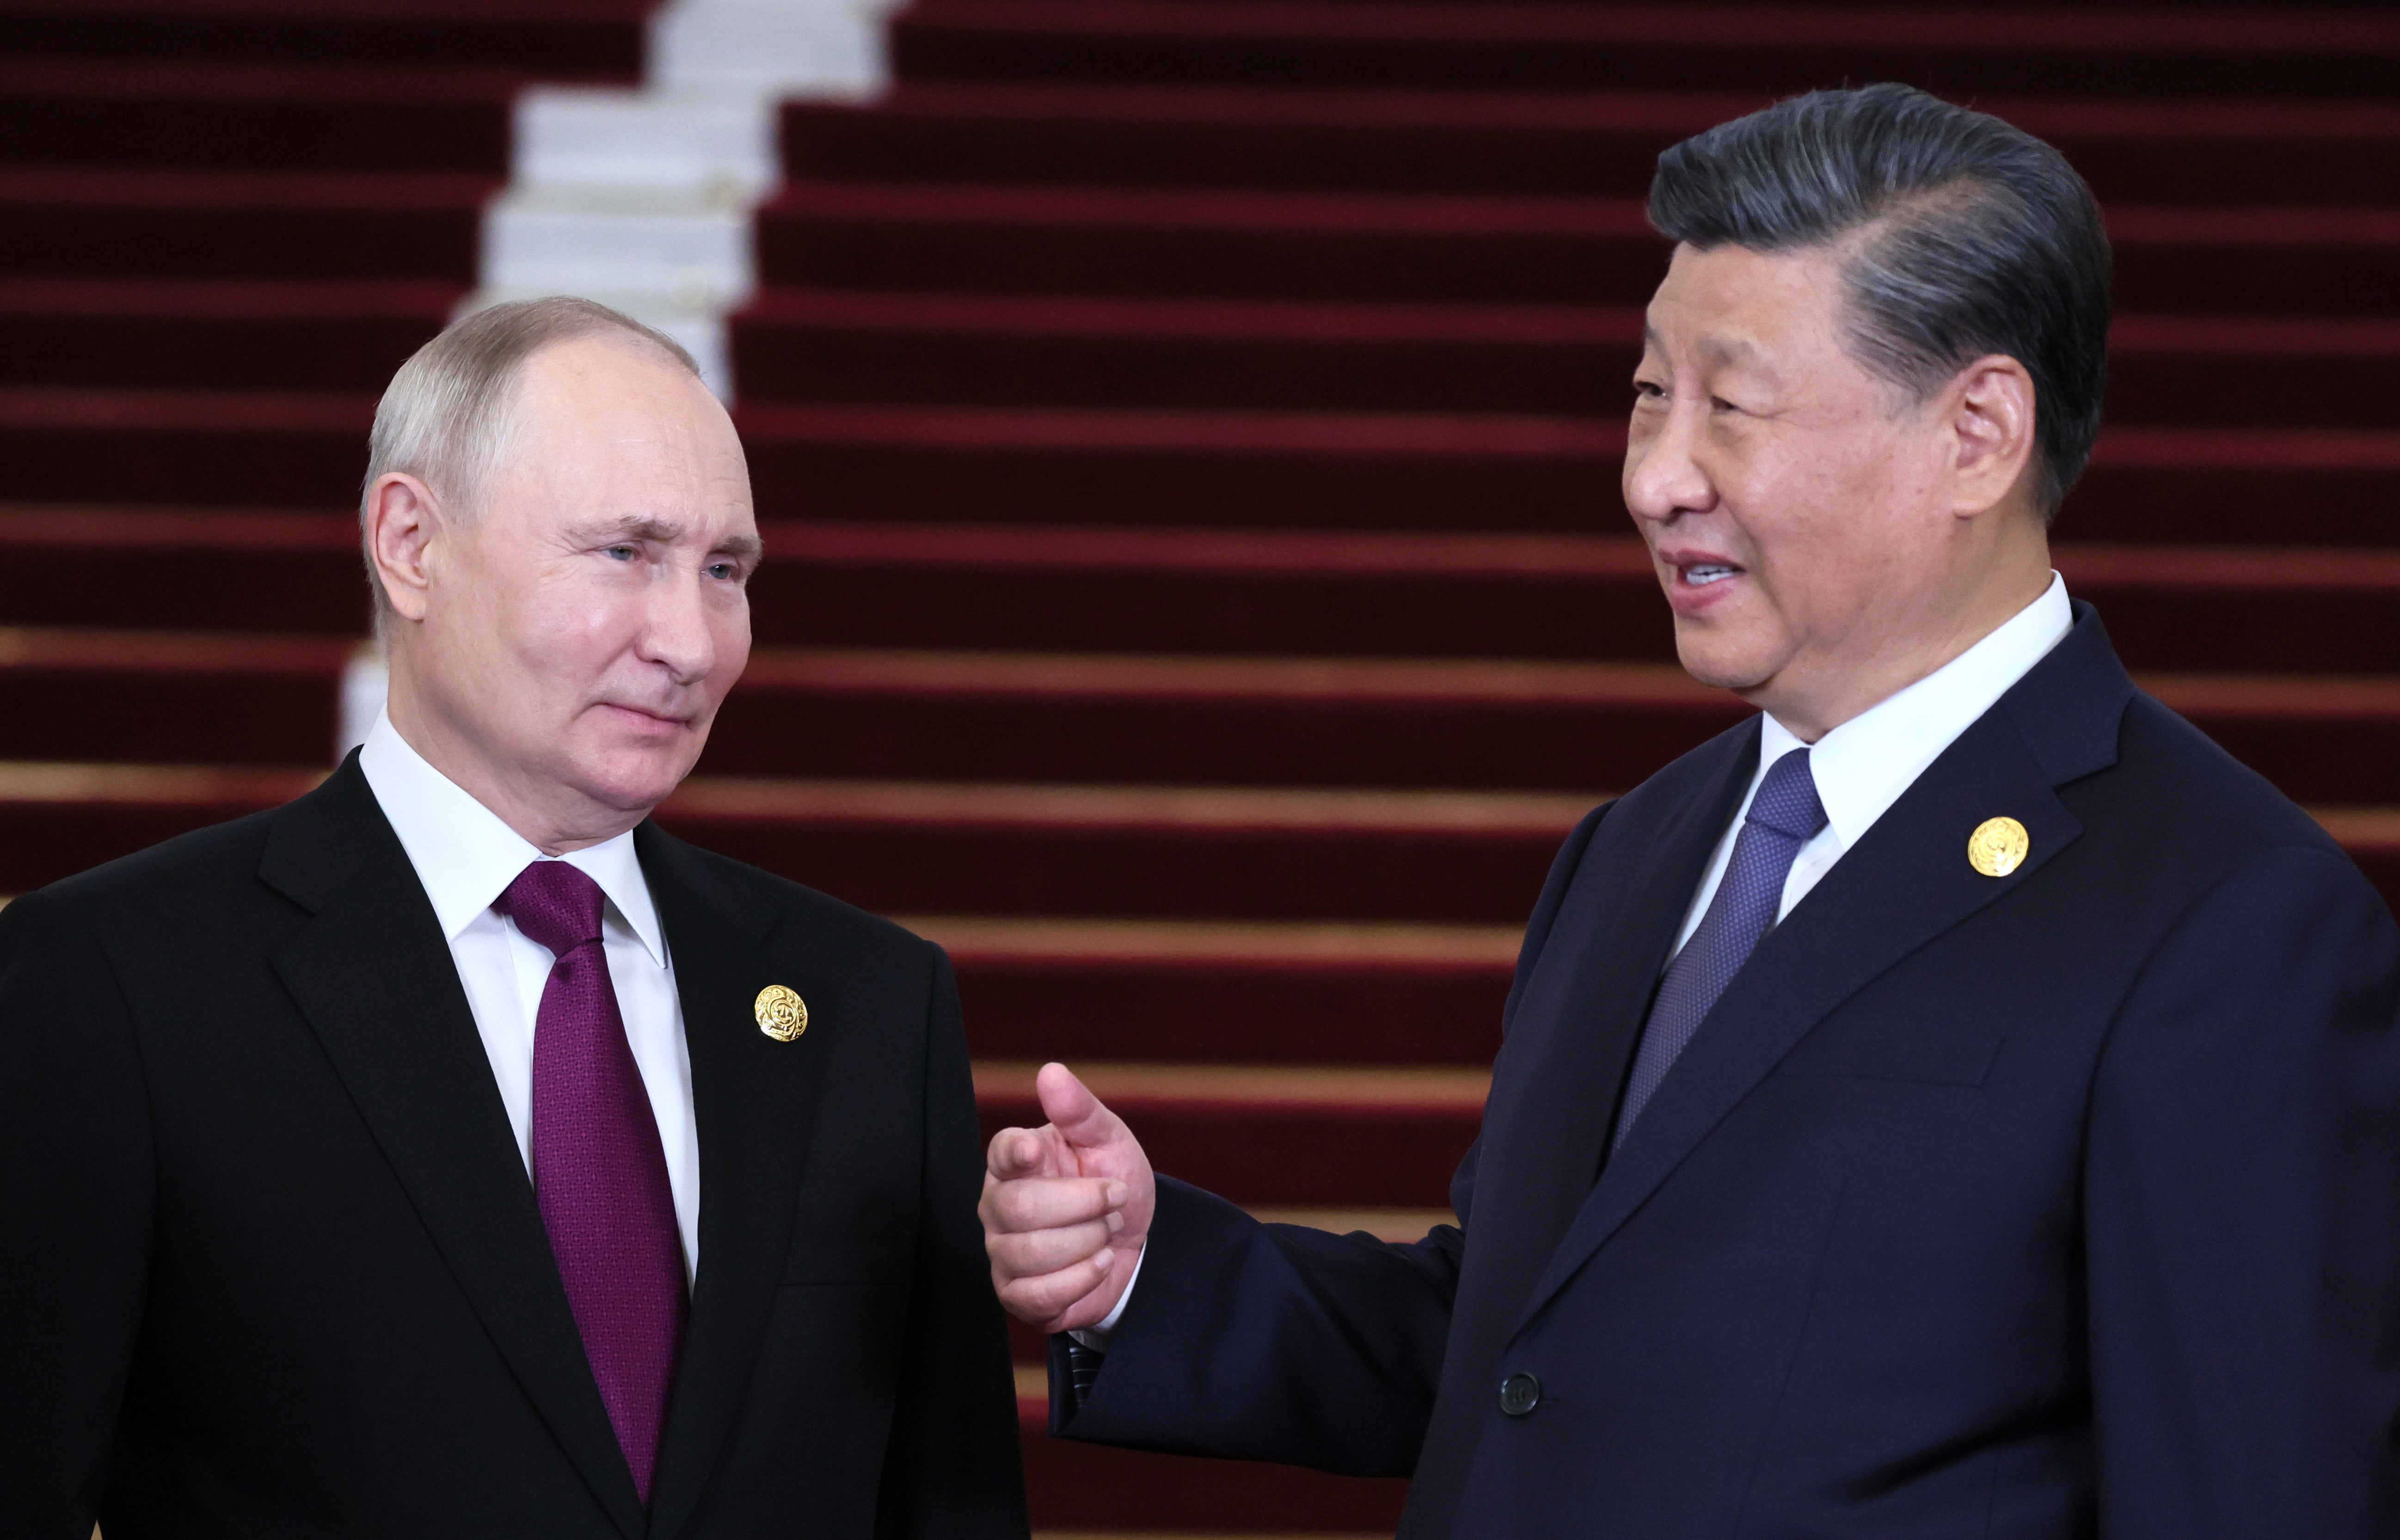 Russia and China have been accused of being behind some cyber attacks